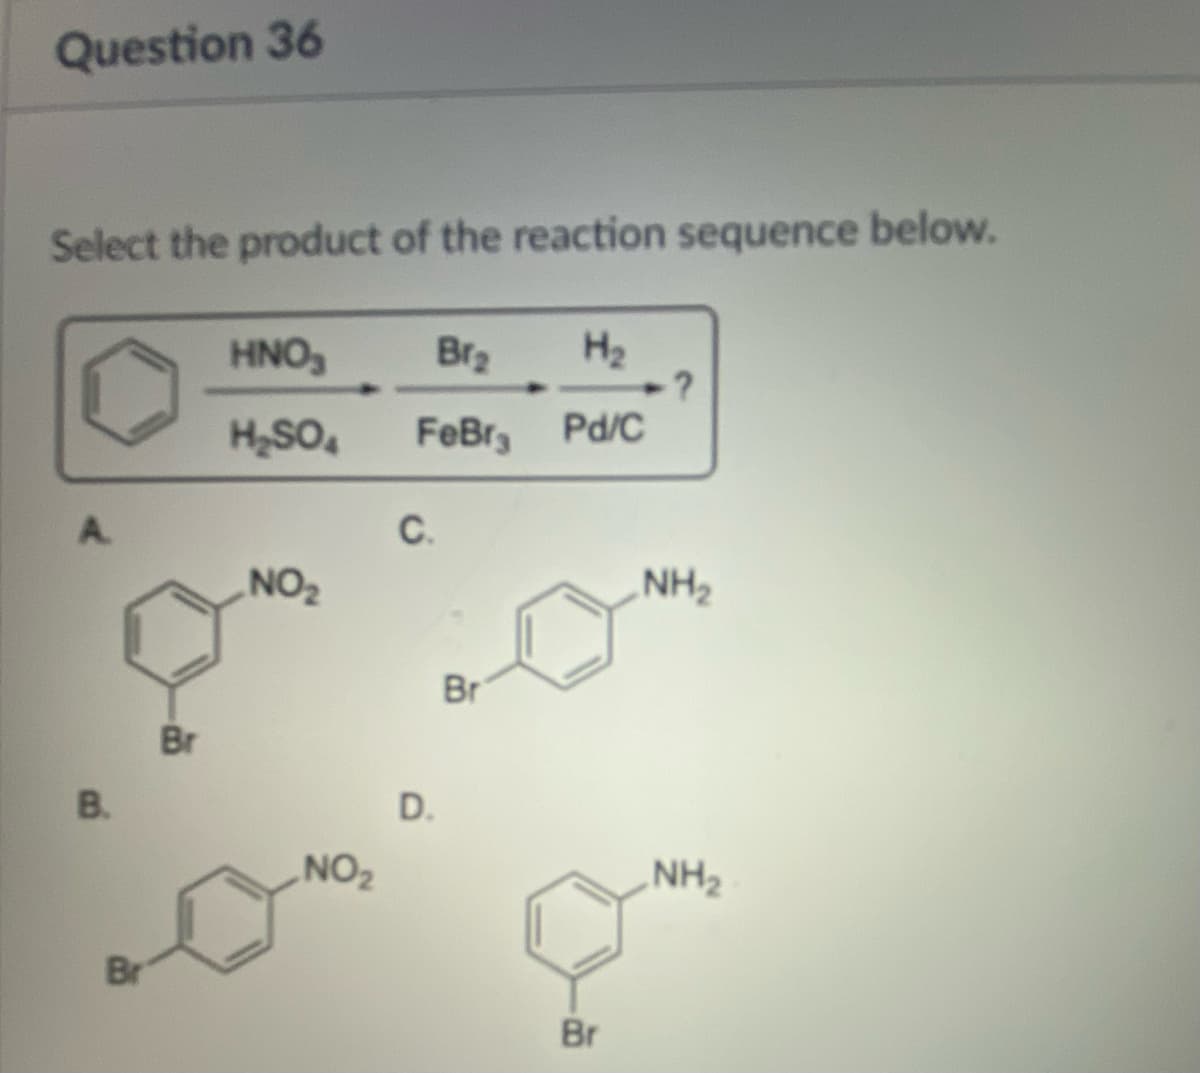 Question 36
Select the product of the reaction sequence below.
B.
Br
Br
HNO₂
H₂SO4
NO₂
NO₂
Br₂ H₂
FeBr, Pd/C
C.
D.
Br
Br
·?
NH₂
NH₂